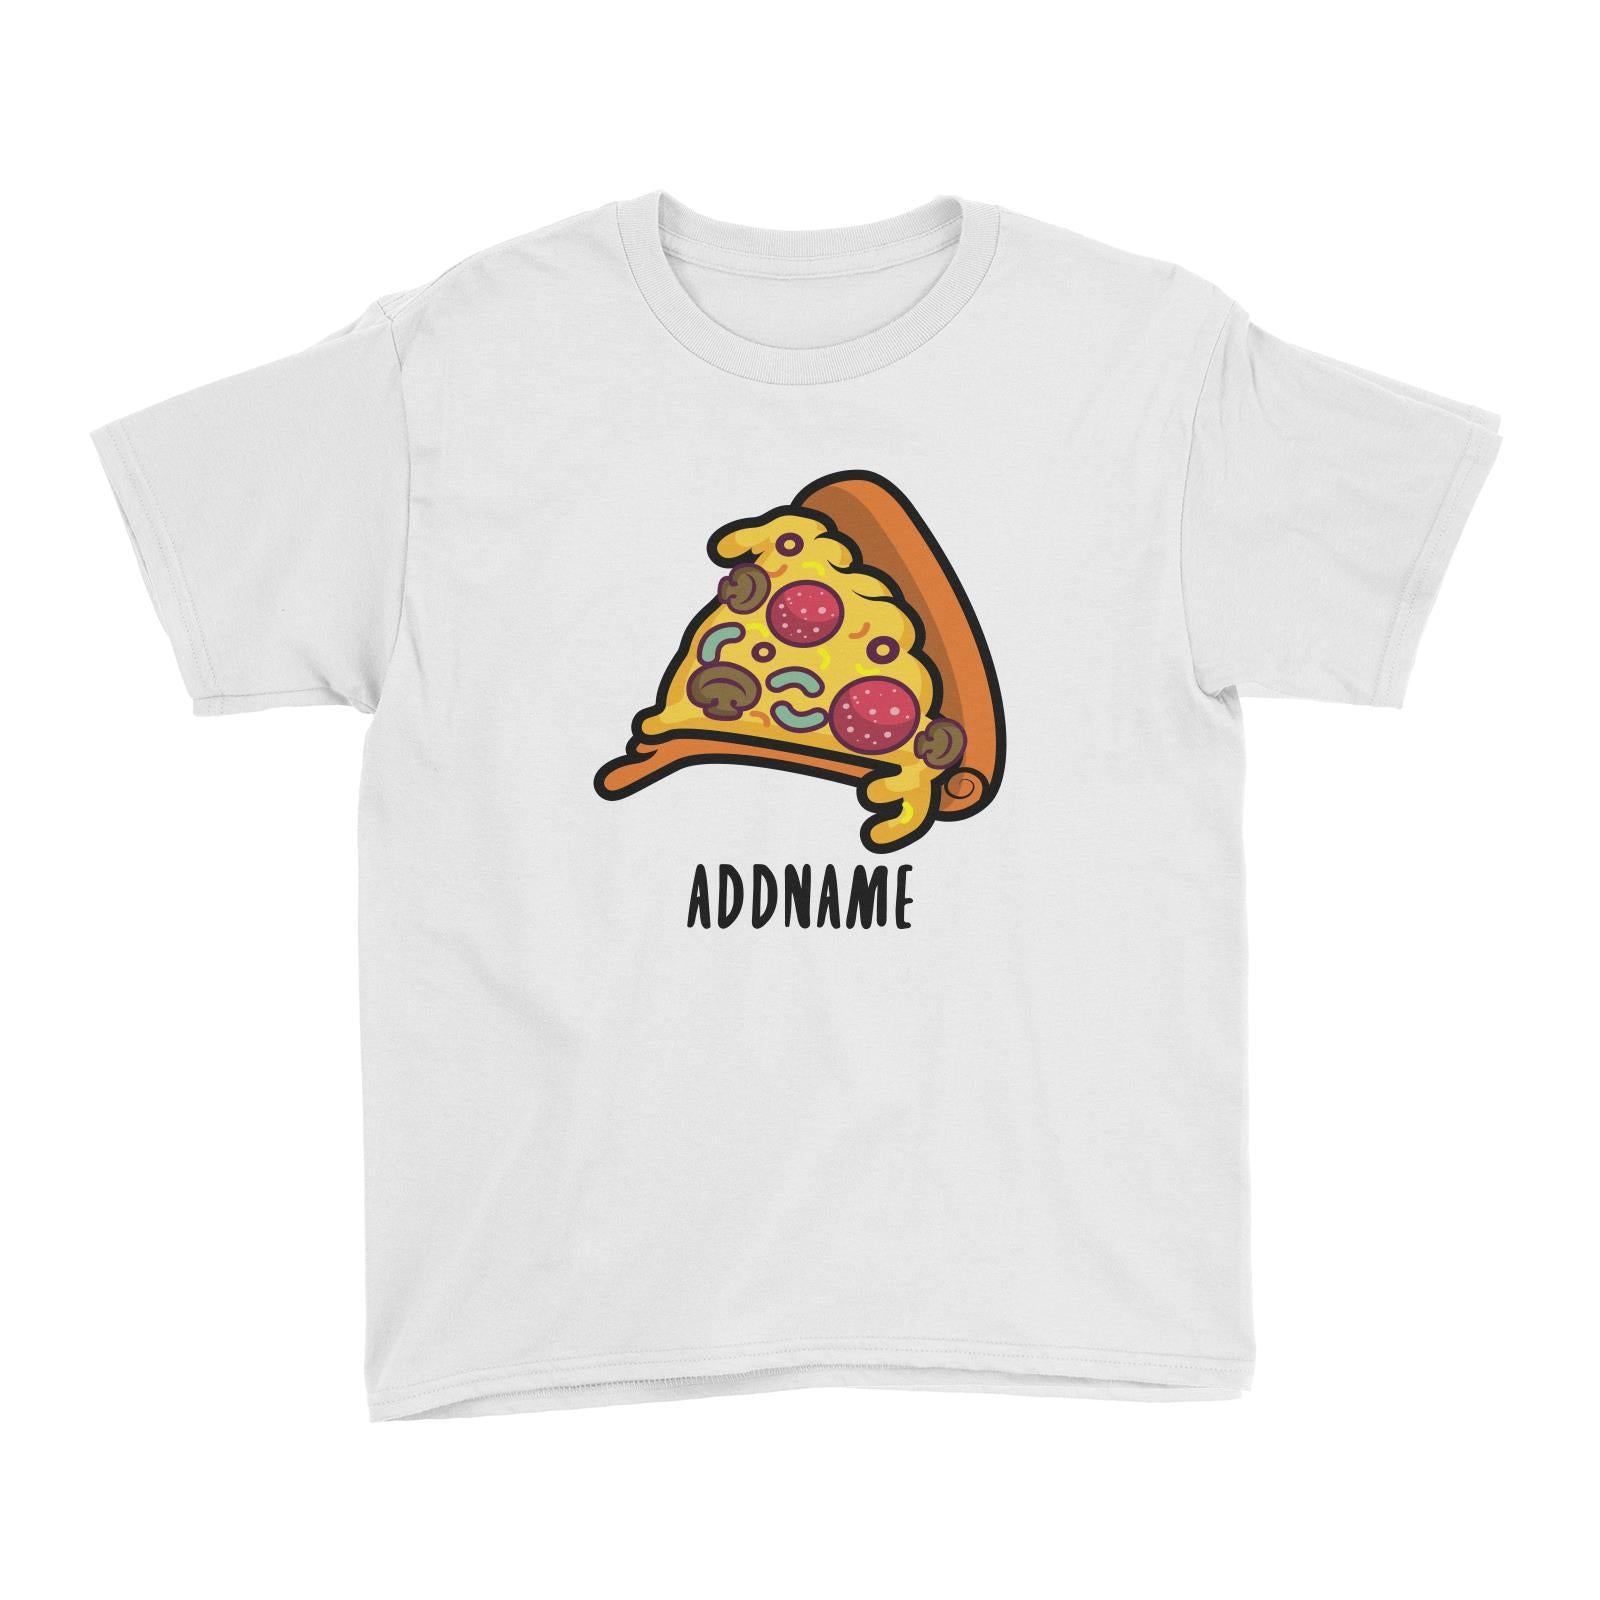 Fast Food Pizza Slice Addname Kid's T-Shirt  Matching Family Comic Cartoon Personalizable Designs